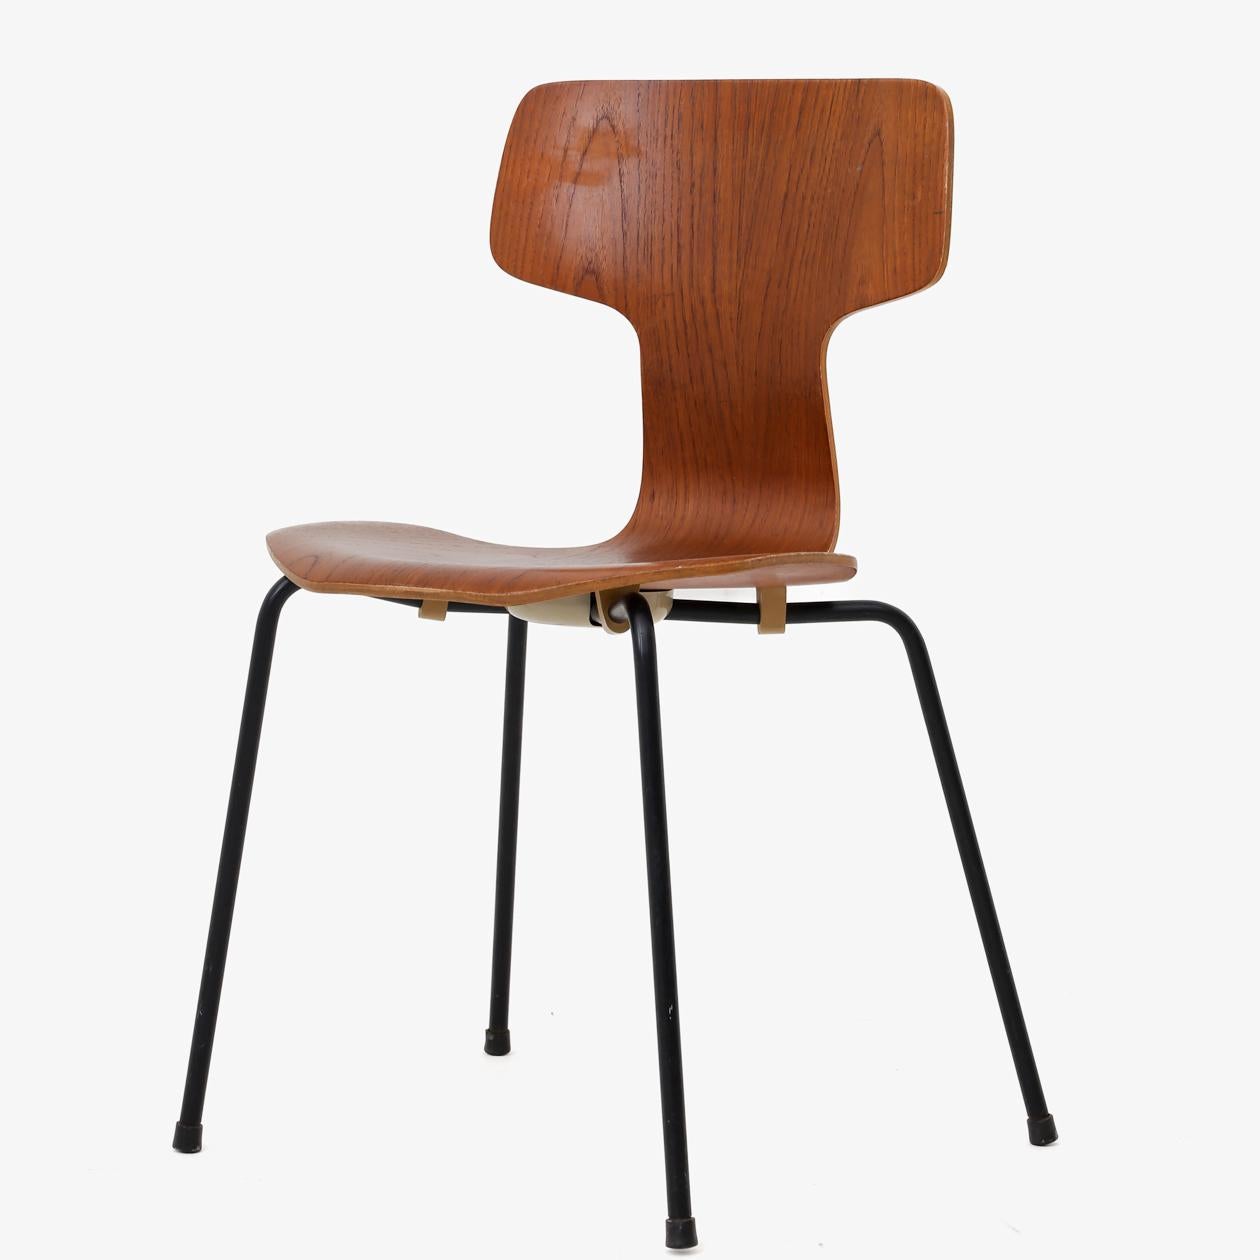 Set of 6 chairs. AJ 3103 - 'Hammer' chairs in teak with black lacquered metal legs. Arne Jacobsen / Fritz Hansen